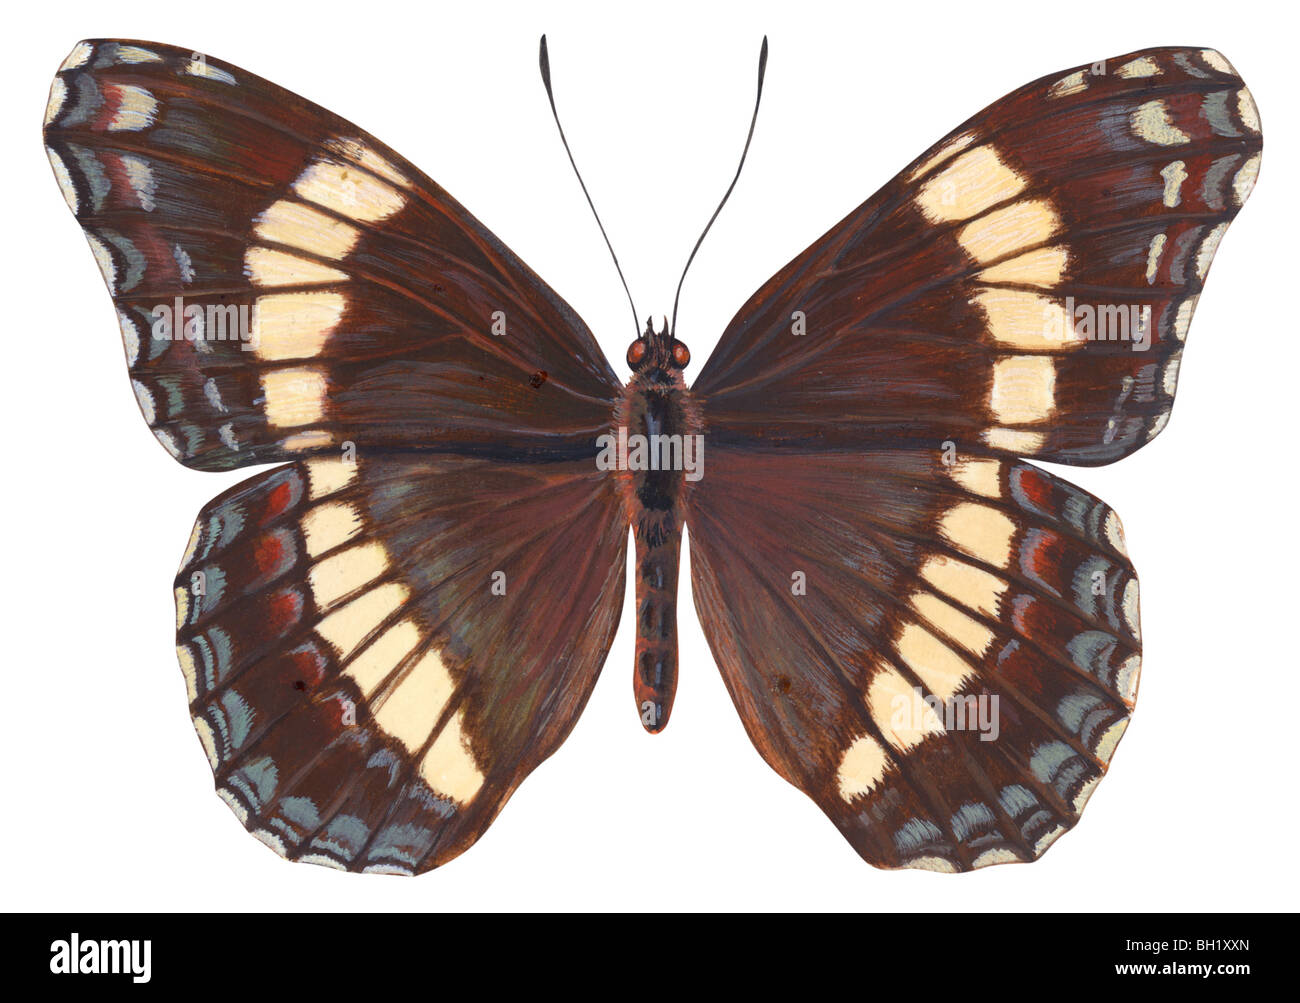 White admiral butterfly Foto Stock